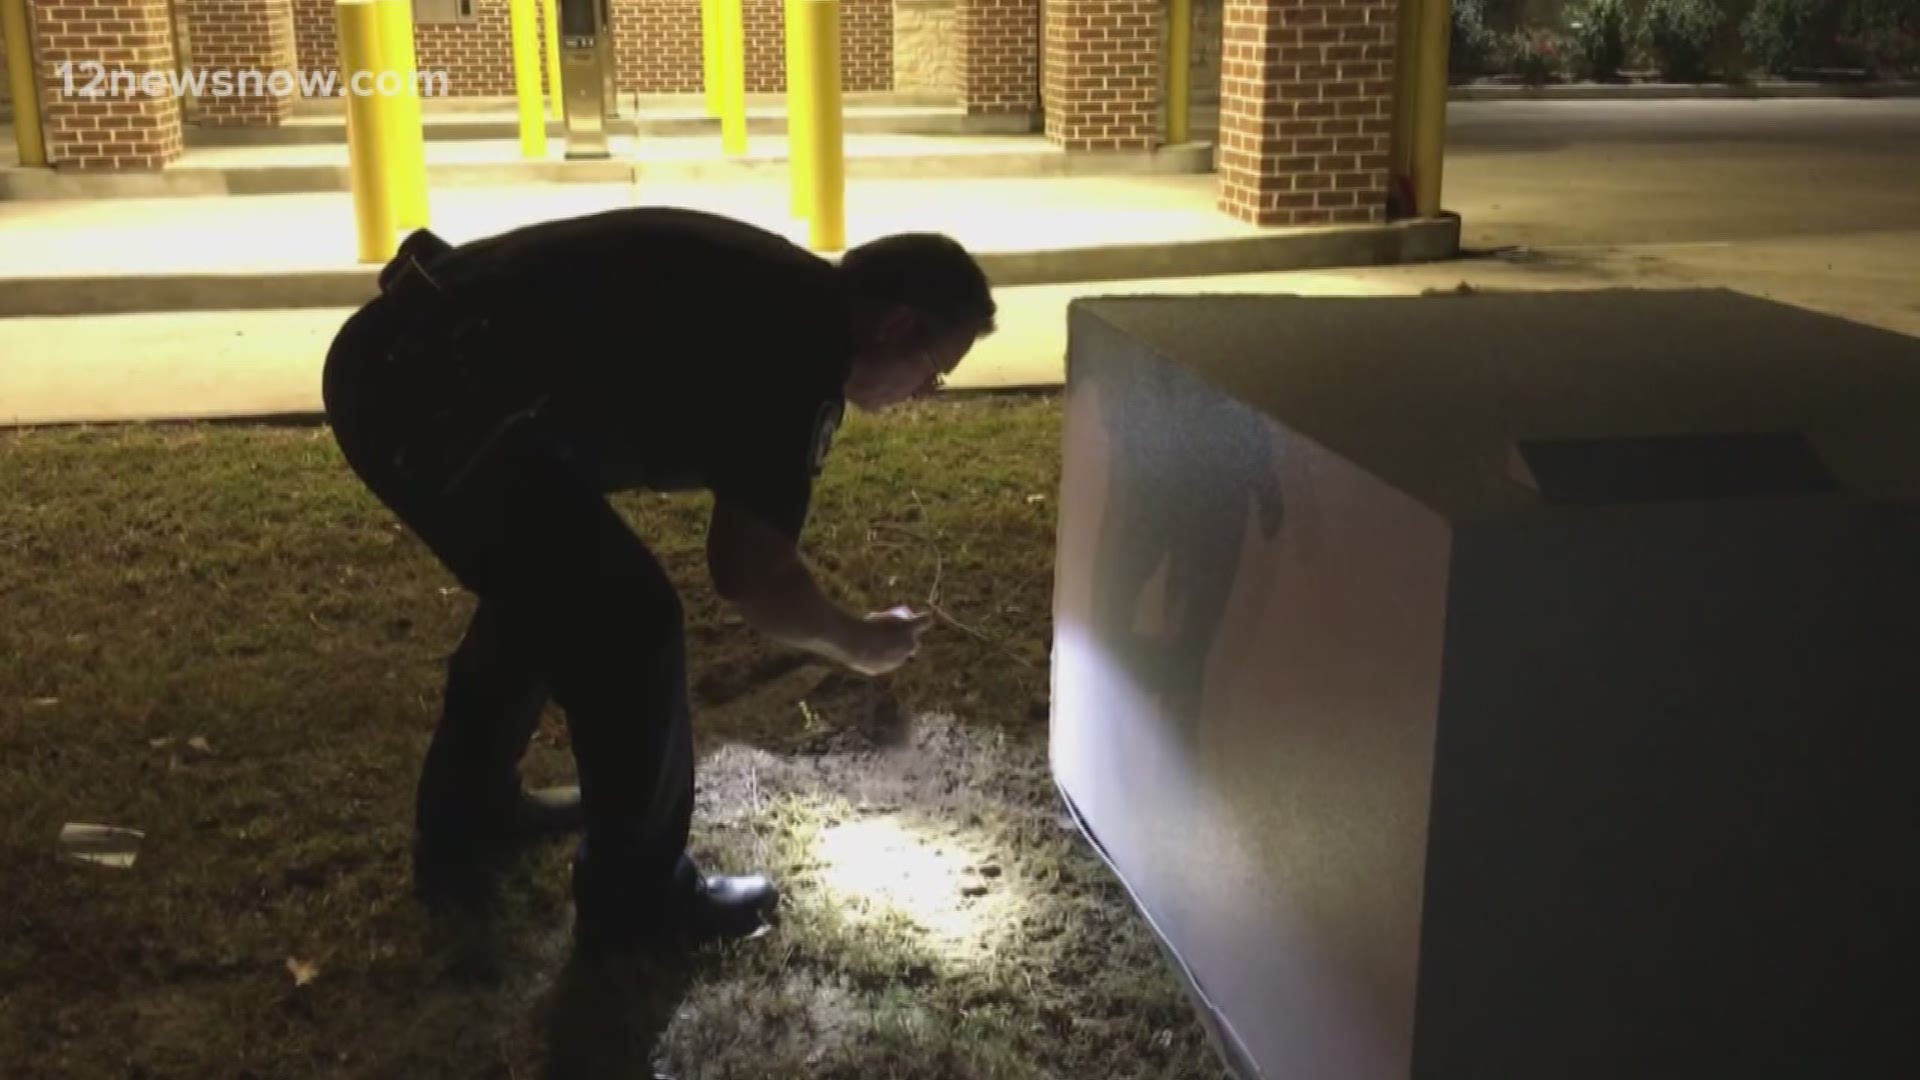 Two men attempted to steal the ATM at First State of Texas Bank on Martin Luther King Drive at Interstate at about 5 a.m. Thursday morning.